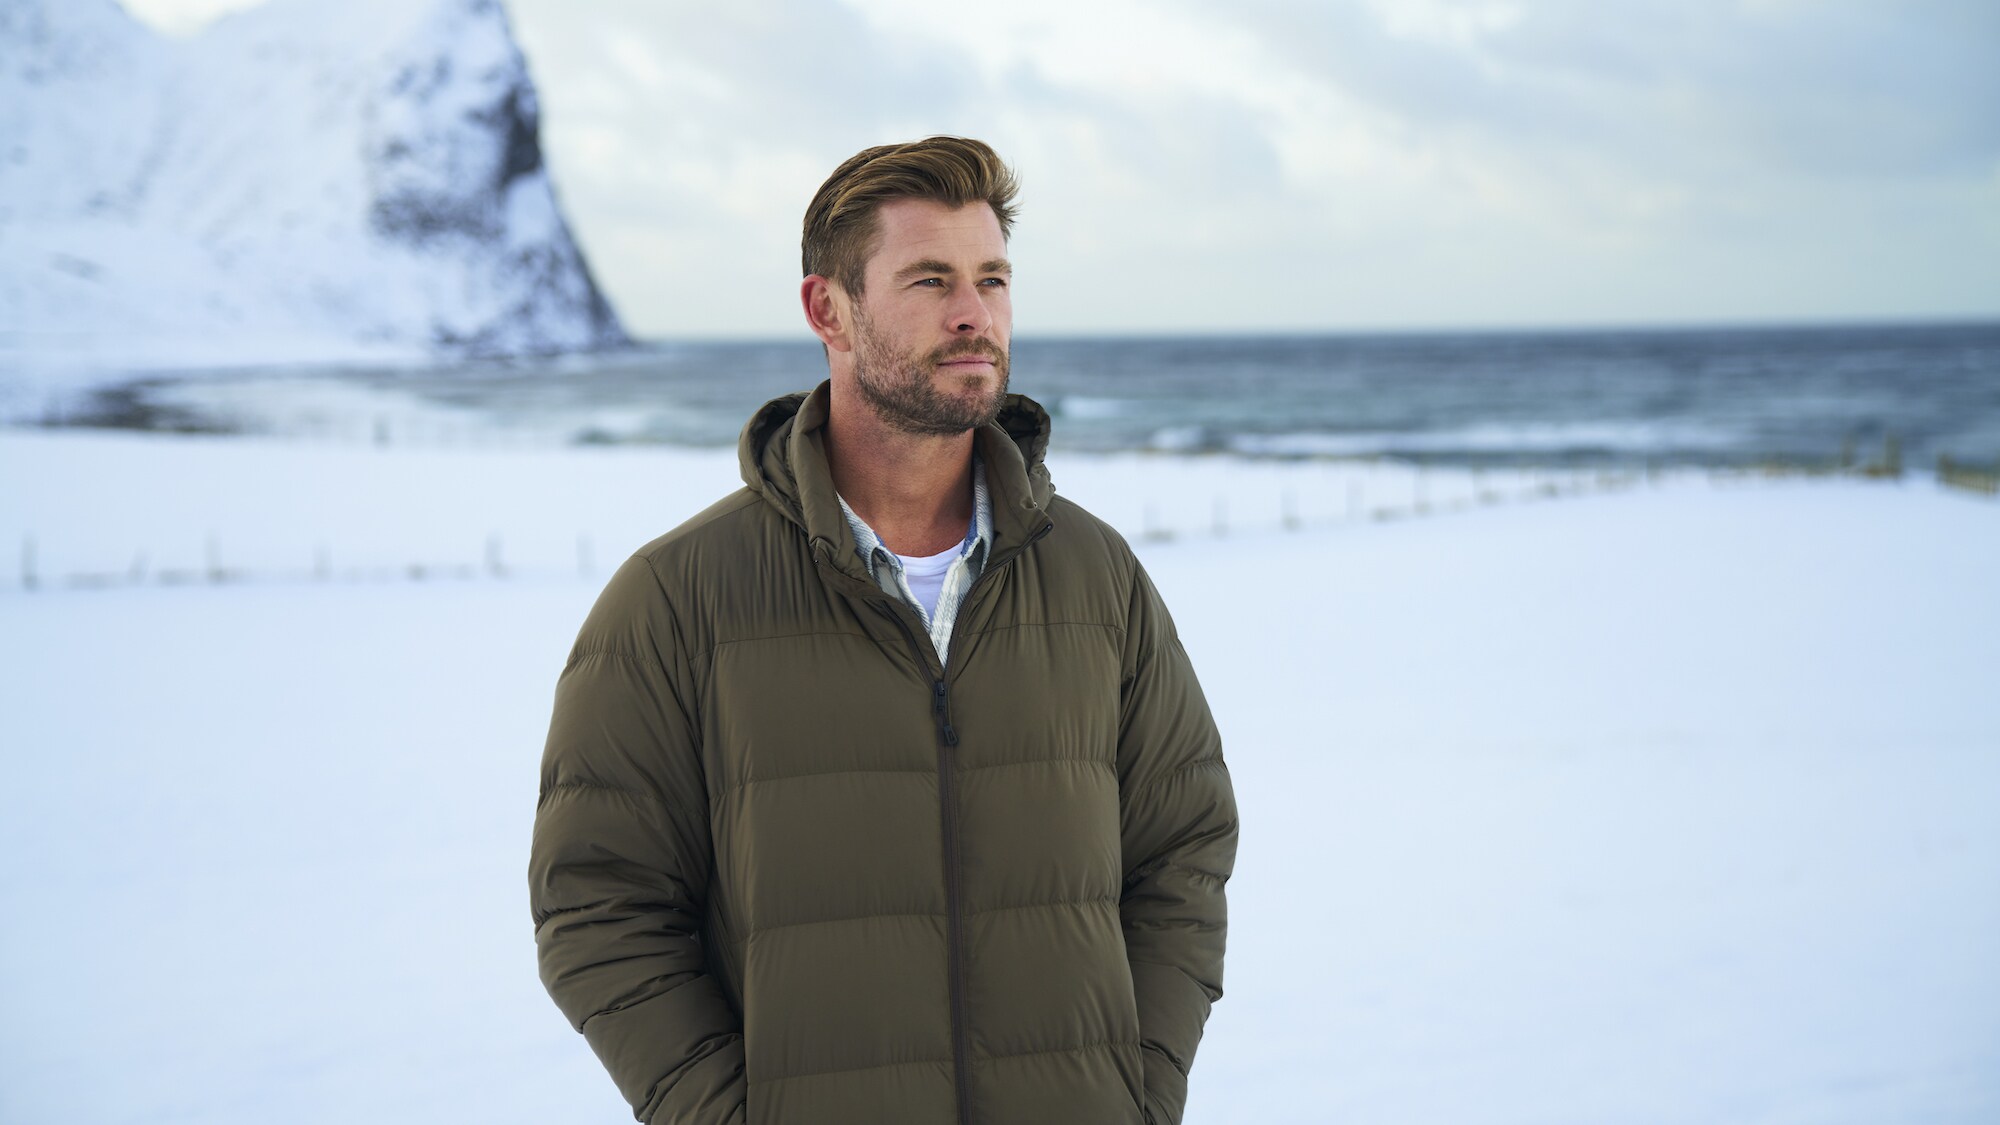 Chris Hemsworth as seen on LIMITLESS. (National Geographic for Disney+/Craig Parry)